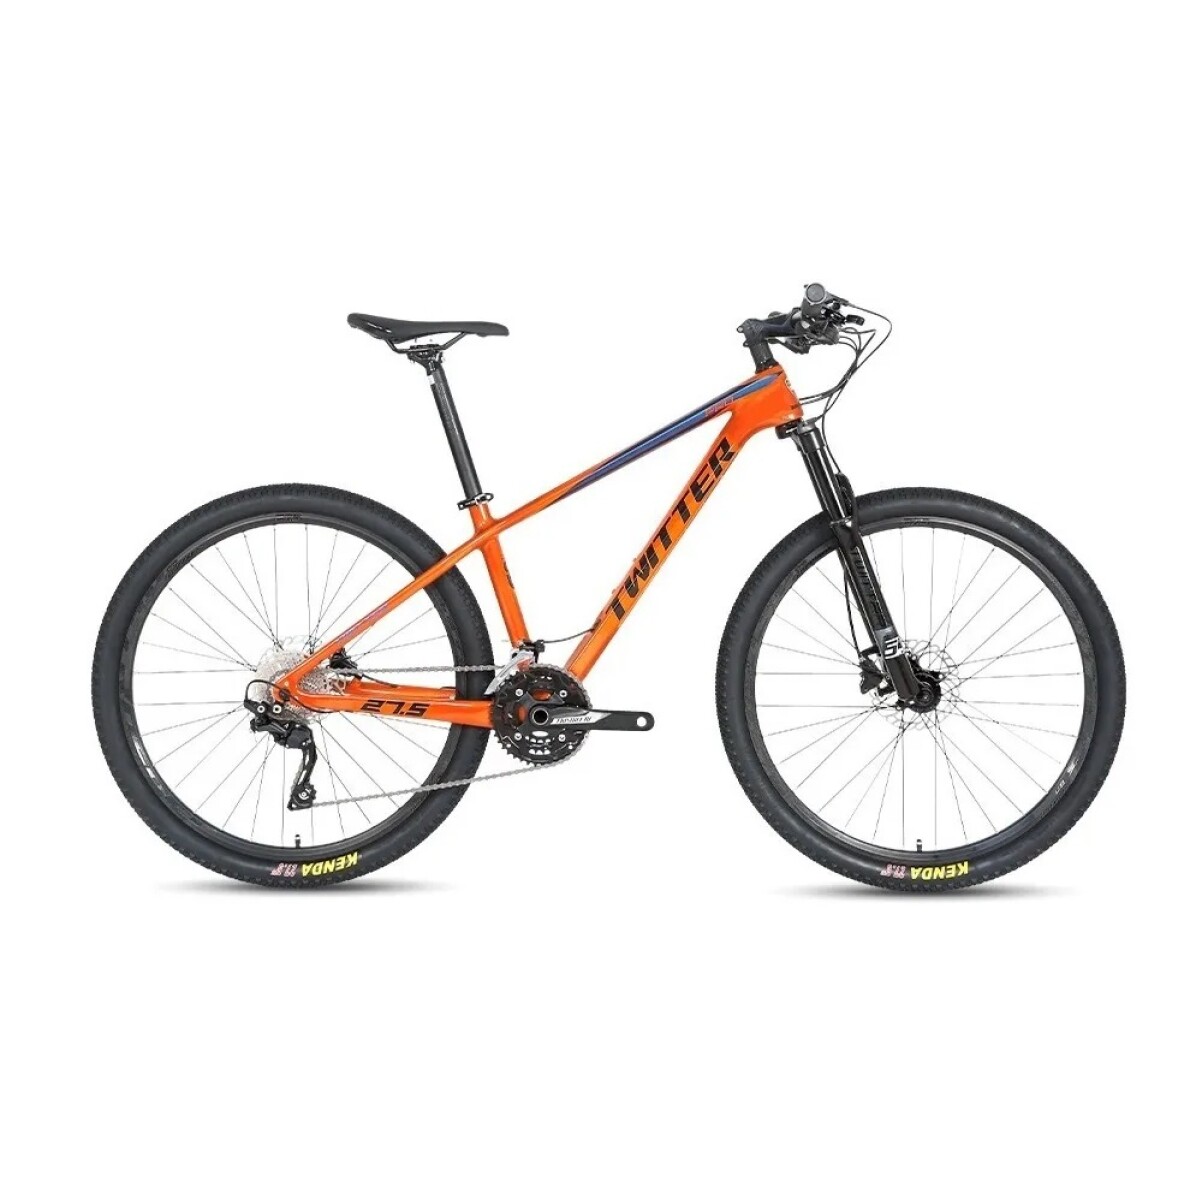 Bicicleta Twitter Leopard-rs 12s*2/r-27,5/t15 Or 